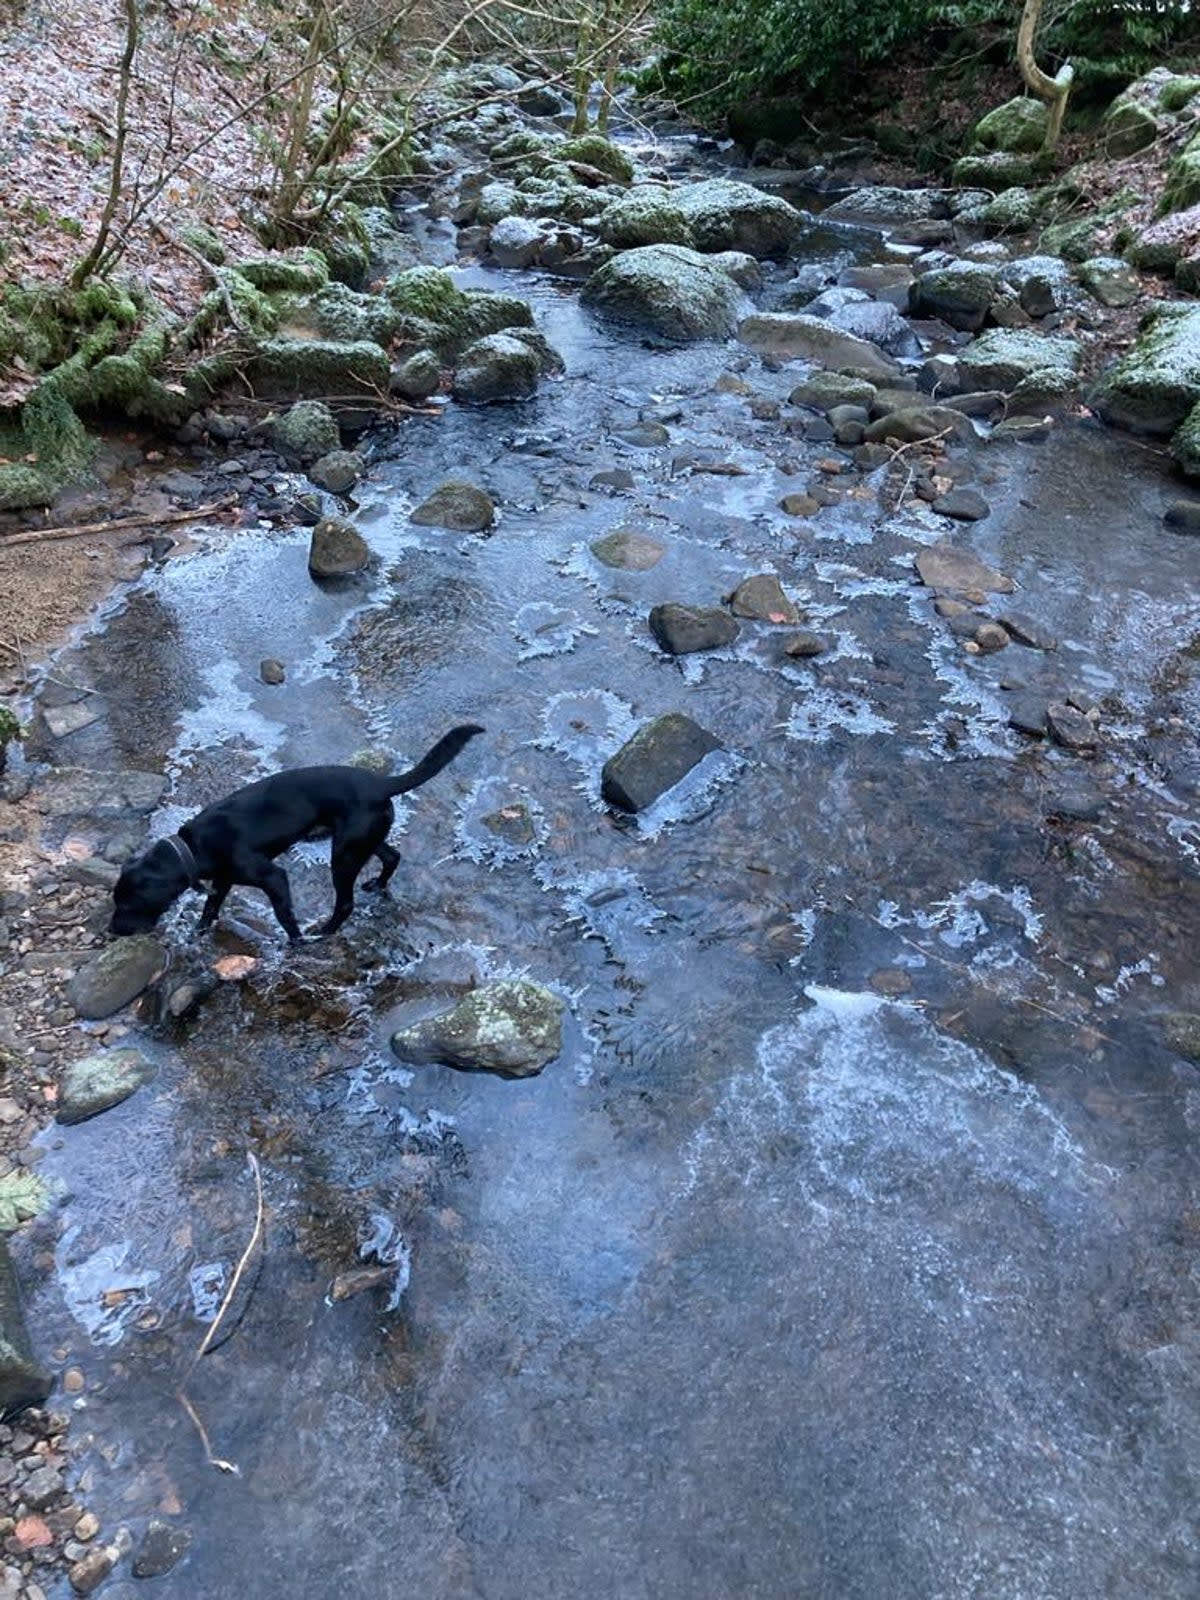 A labrador inspects a frozen stream in Yorkshire (Reader submitted)